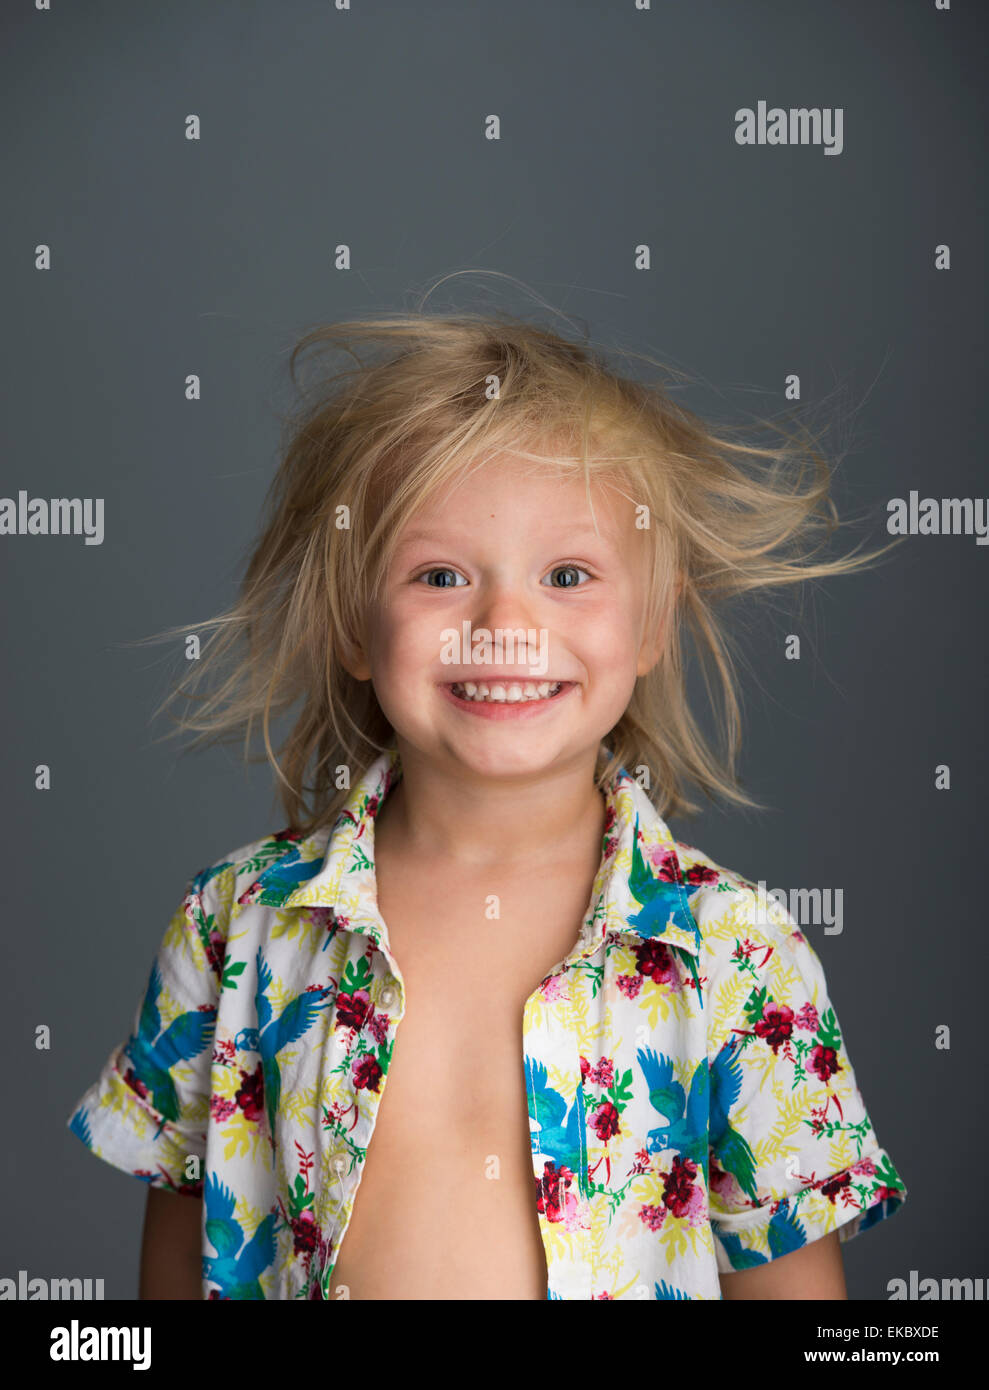 Portrait of young boy with messy hair, smiling Stock Photo